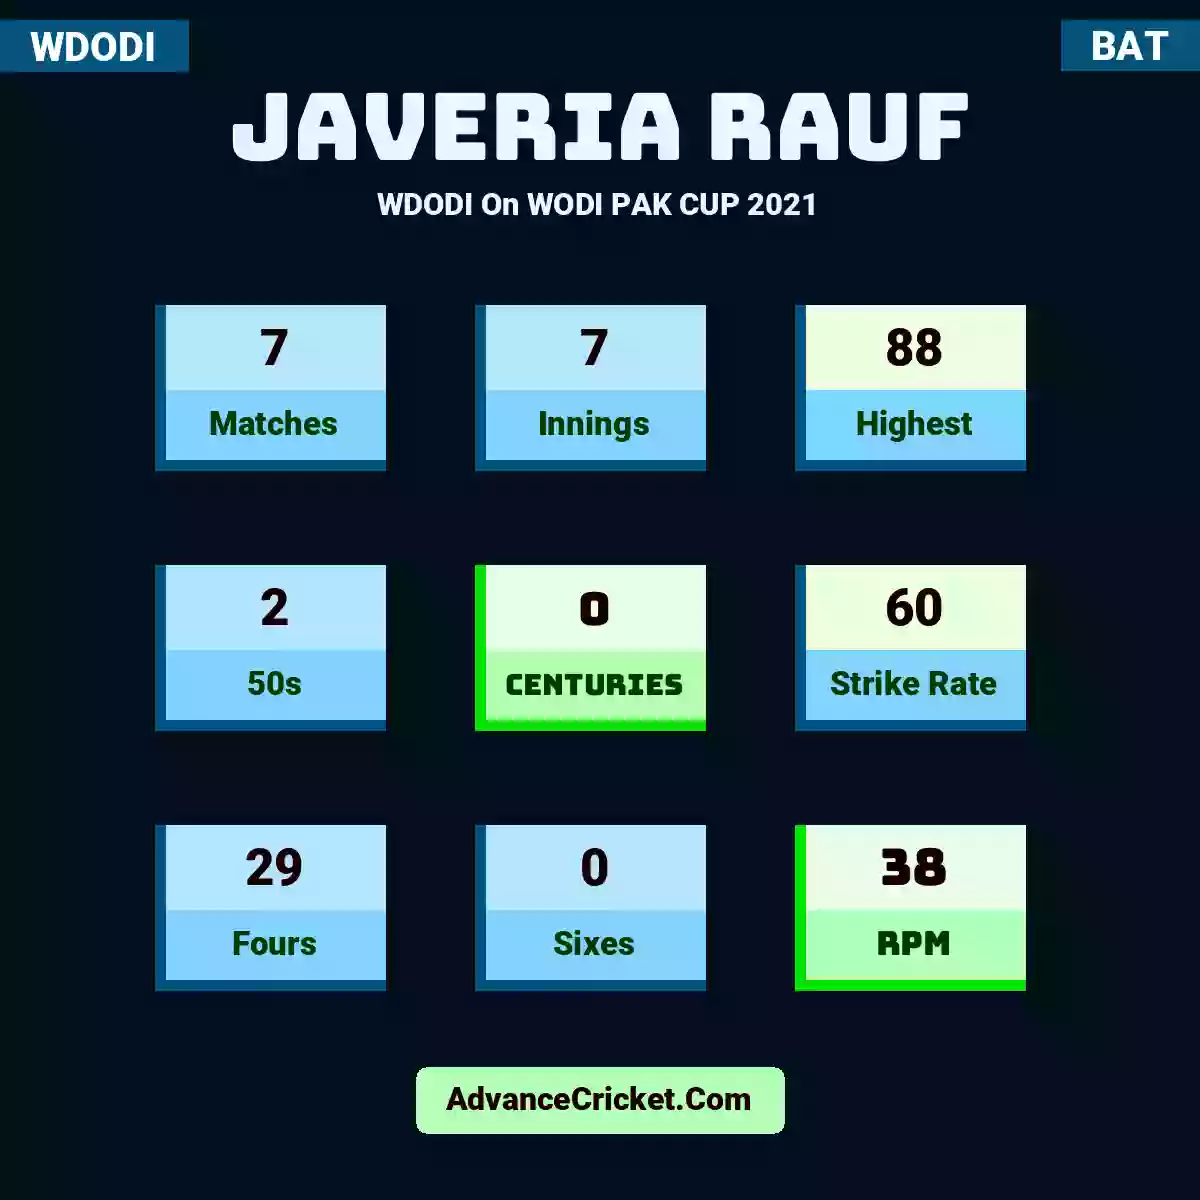 Javeria Rauf WDODI  On WODI PAK CUP 2021, Javeria Rauf played 7 matches, scored 88 runs as highest, 2 half-centuries, and 0 centuries, with a strike rate of 60. J.Rauf hit 29 fours and 0 sixes, with an RPM of 38.